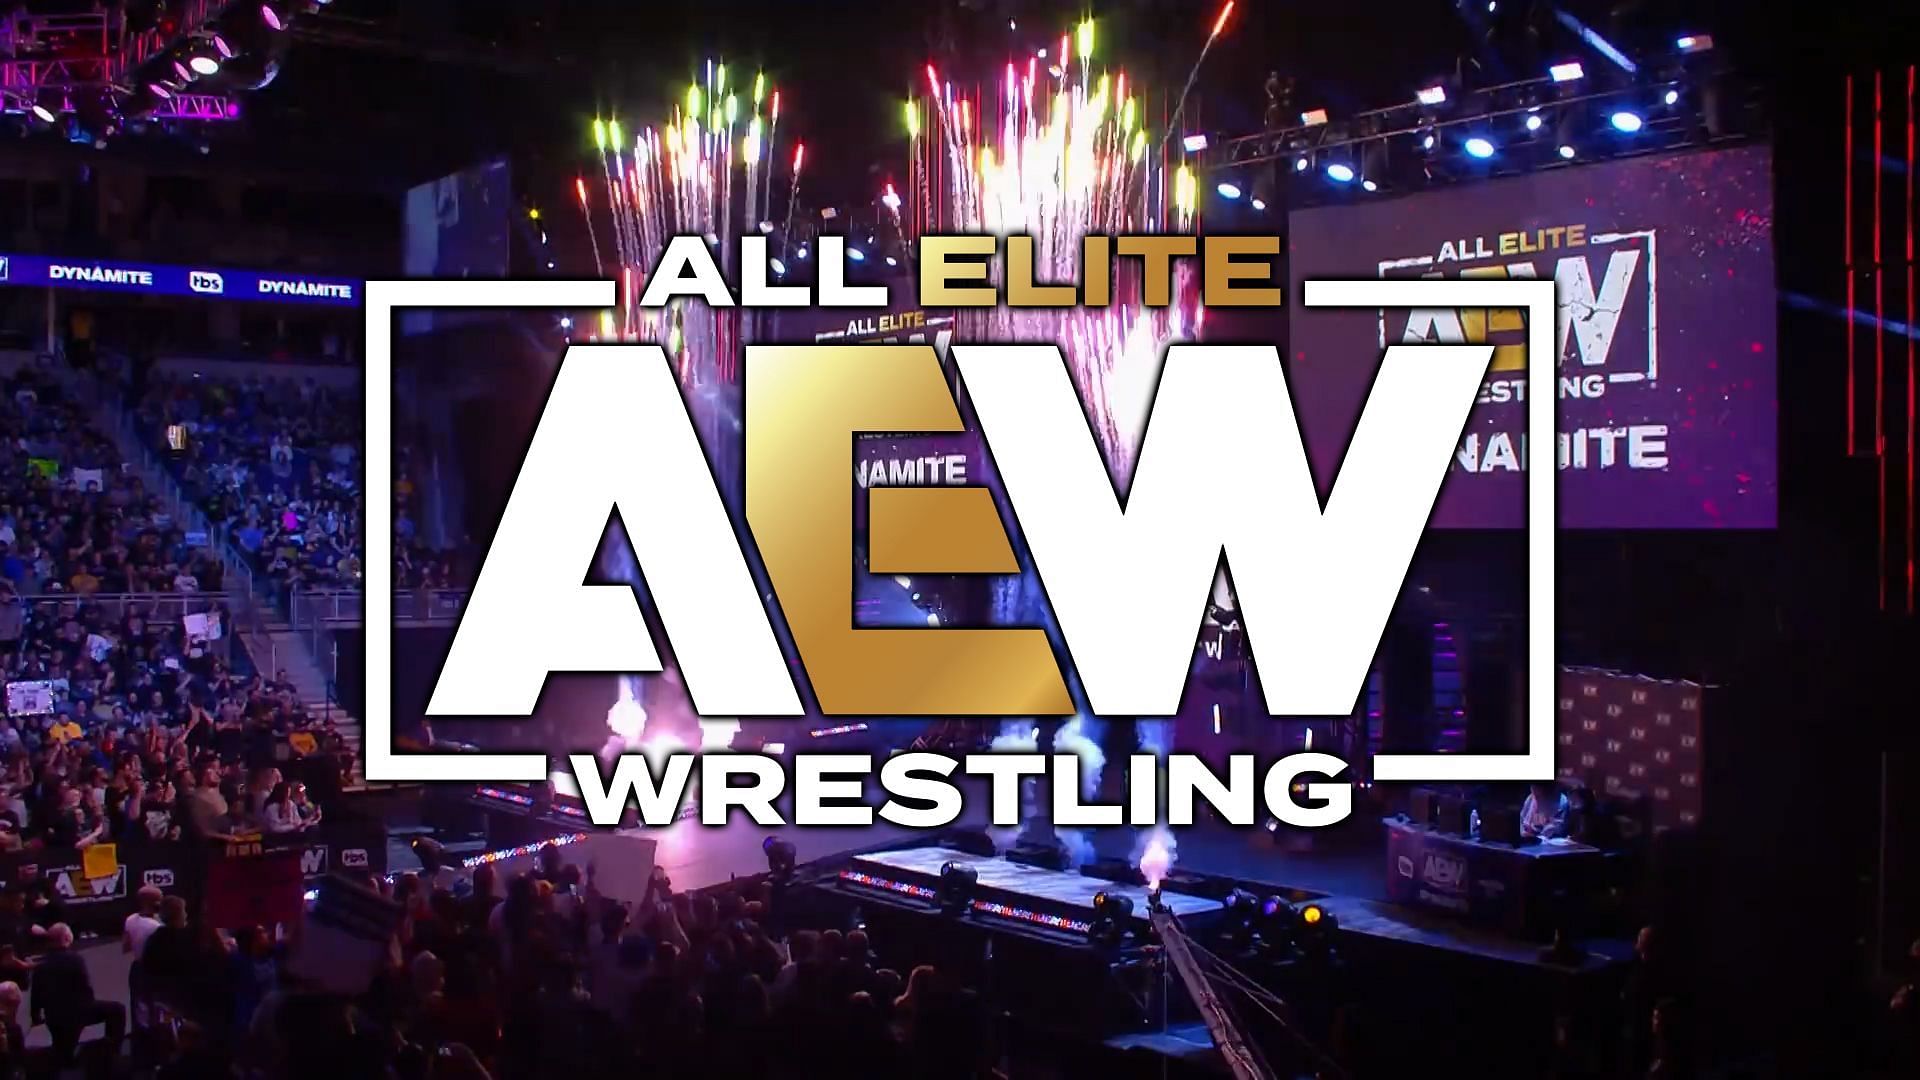 AEW may have snagged another free agent (image credit: All Elite Wrestling on YouTube)